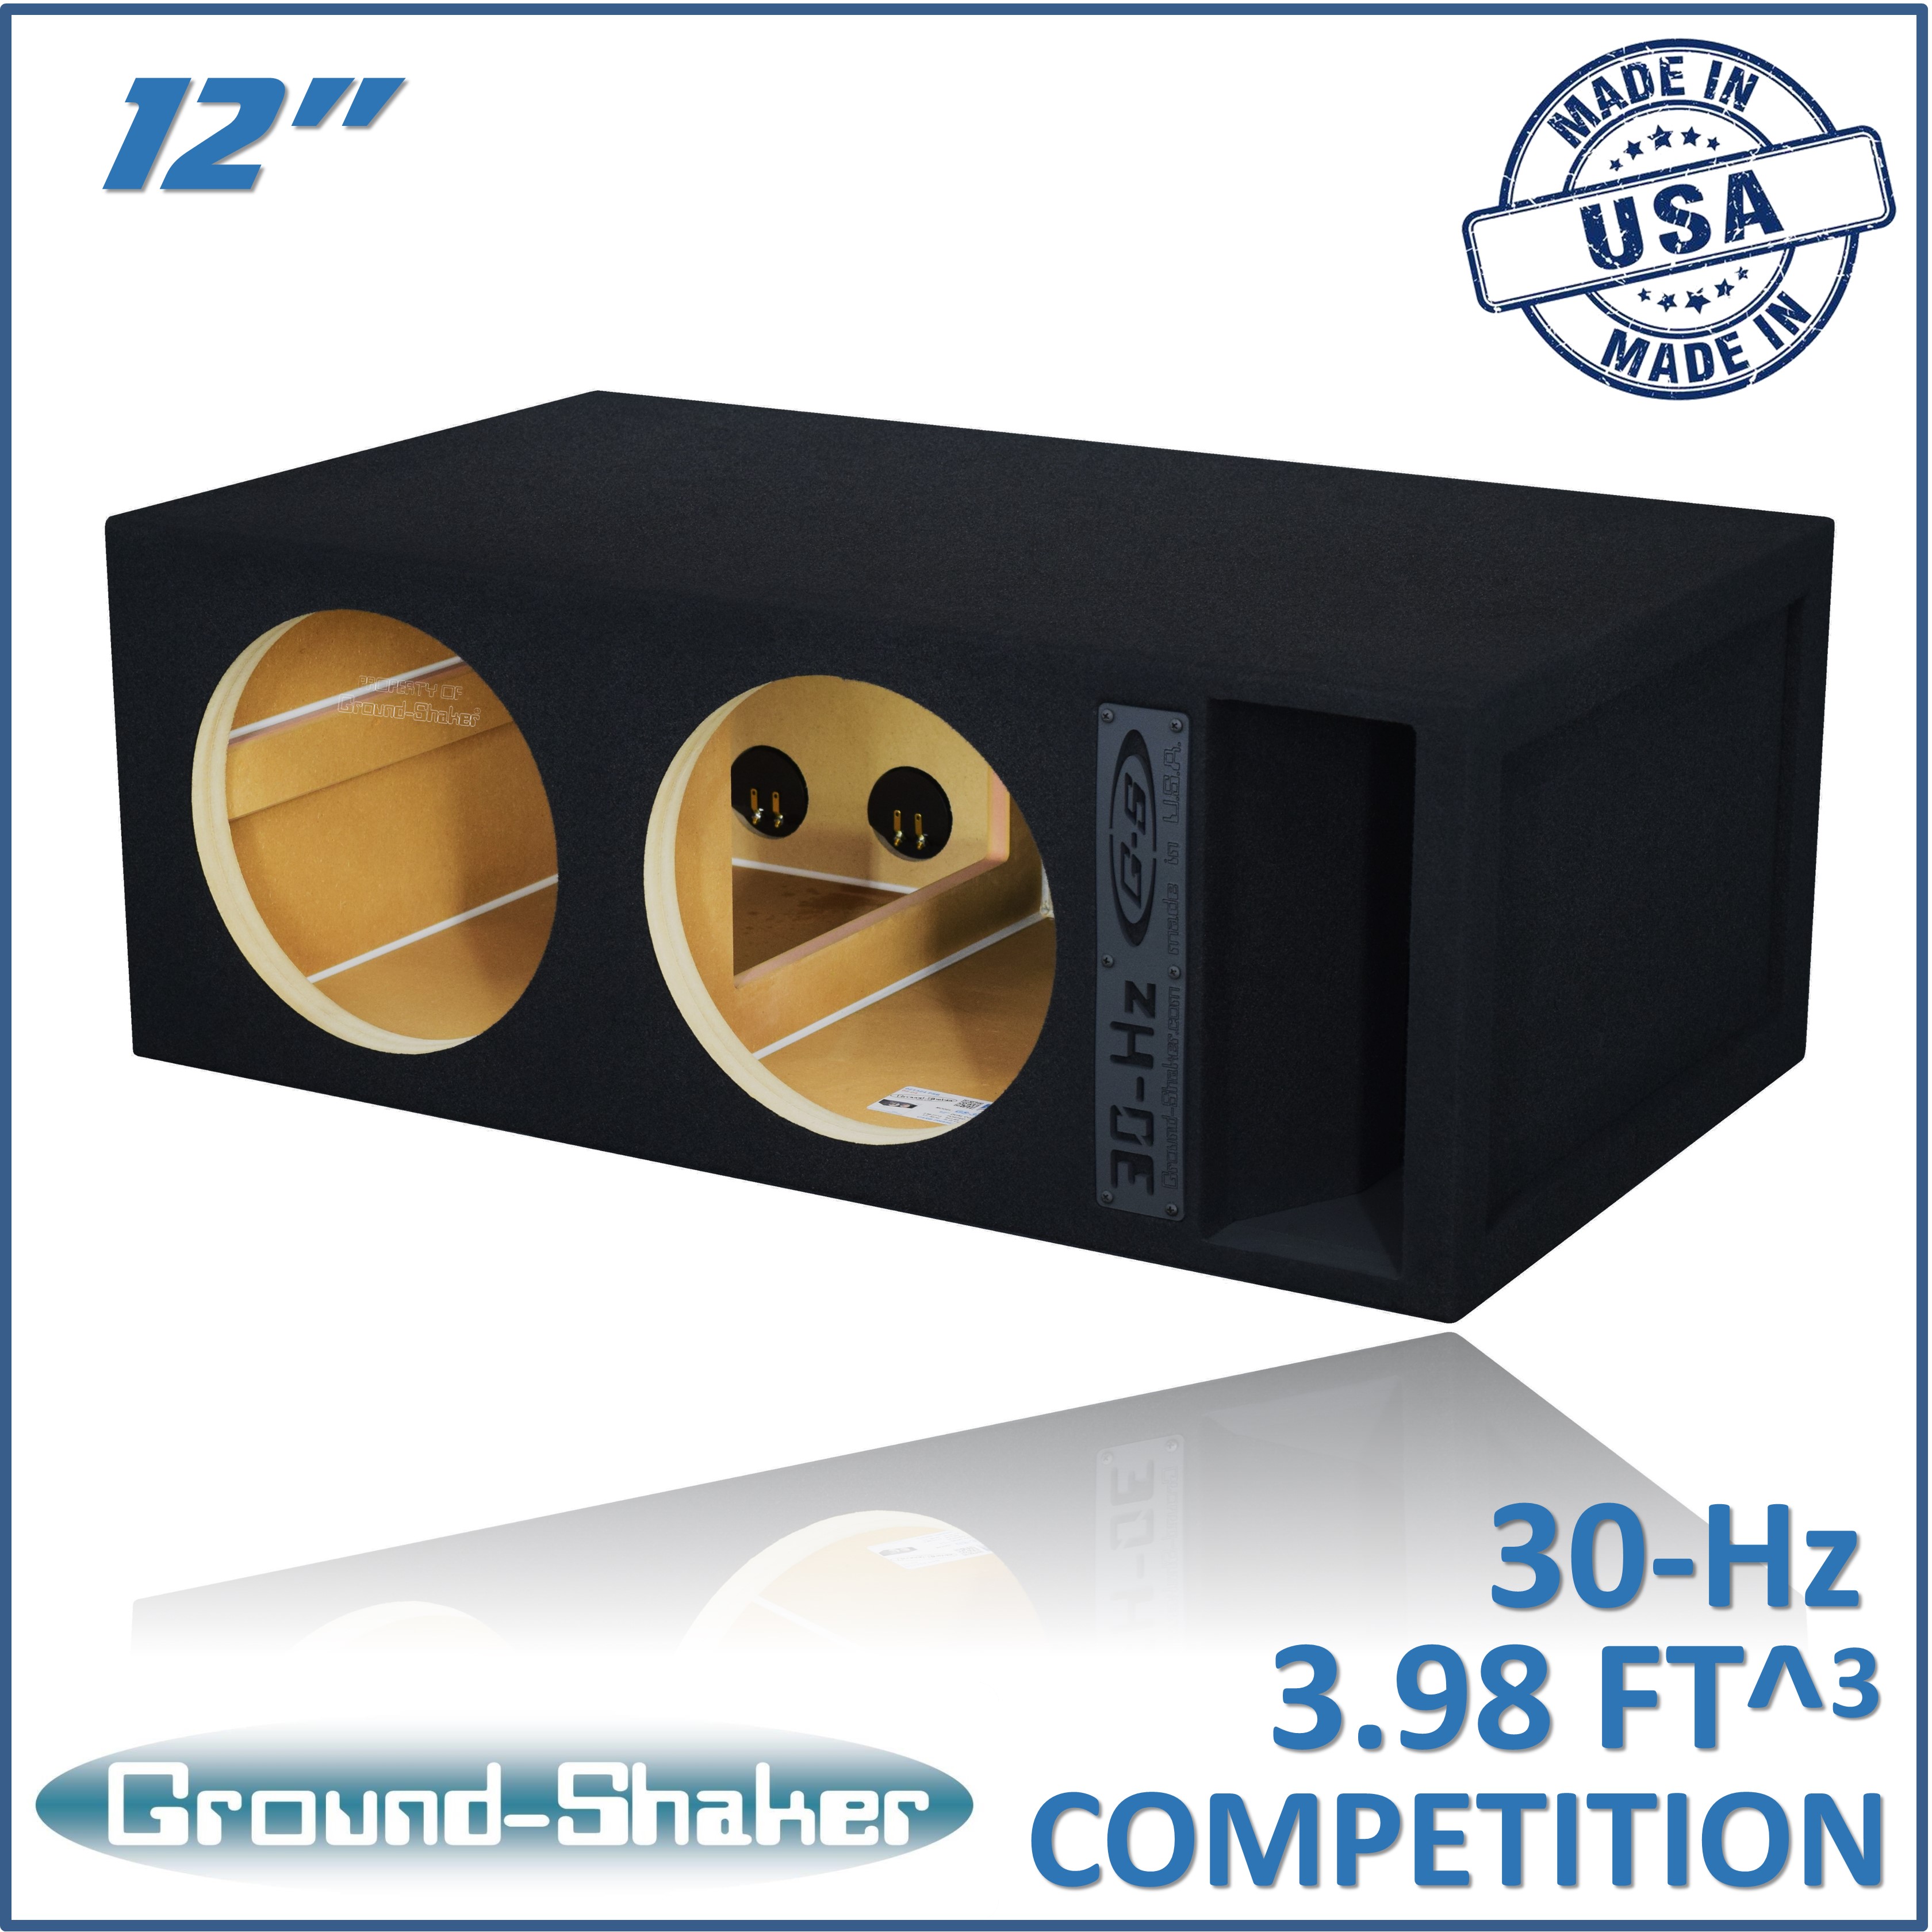 https://www.ground-shaker.com/images/products/30hz212b-1_442884461.jpg